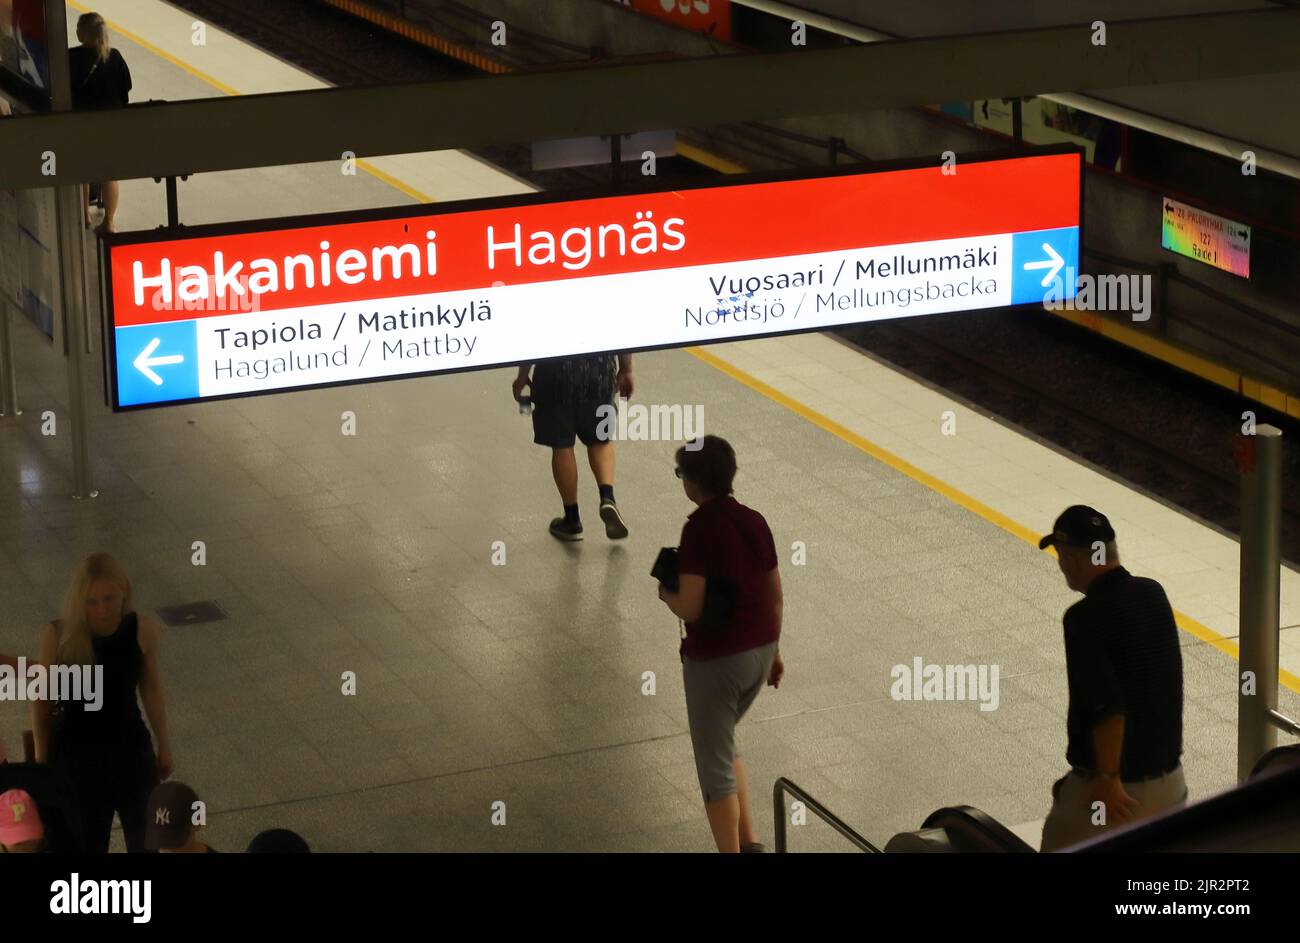 Helsinki, Finland -  August 20, 2022: View of the Helsinki metro station Hakaninemi bilingual information sign in Finnish and Swedish. Stock Photo